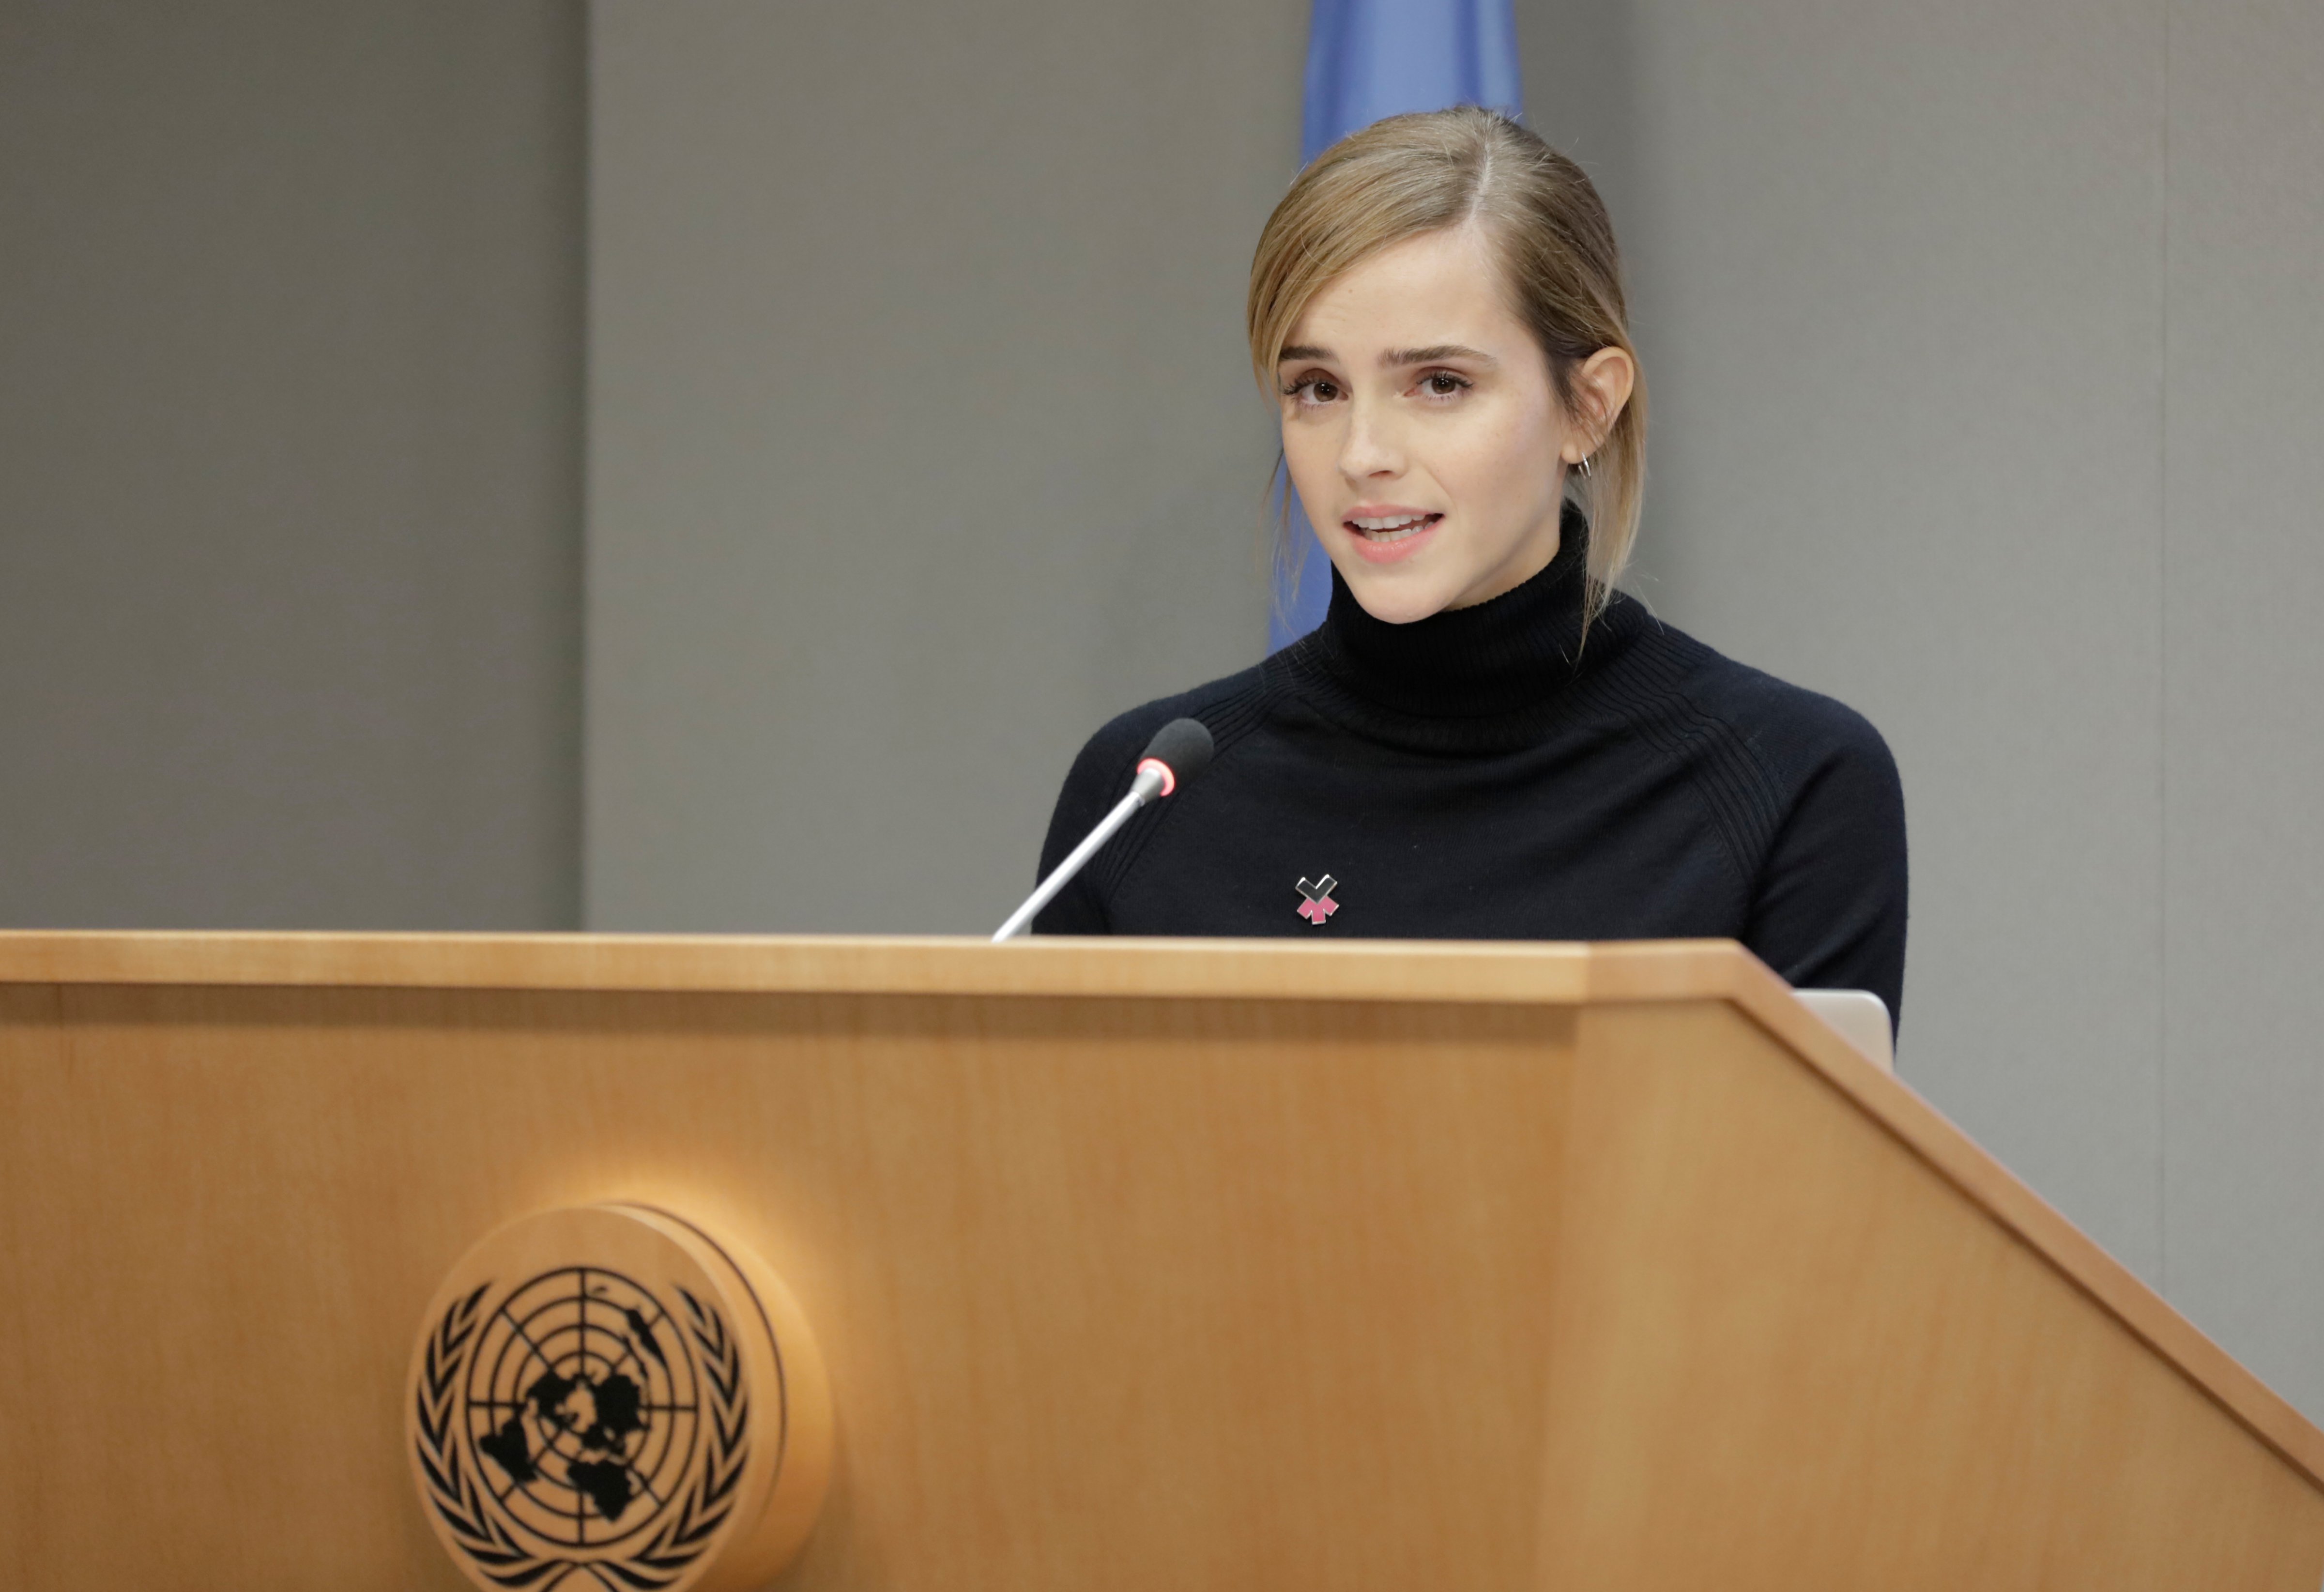 Emma Watson has helped produce an inspiring short movie about the hurdles women have overcome and still face in their path to gender equality (Luiz Rampelotto/EuropaNewswire—Luiz Rampelotto/Sipa USA)